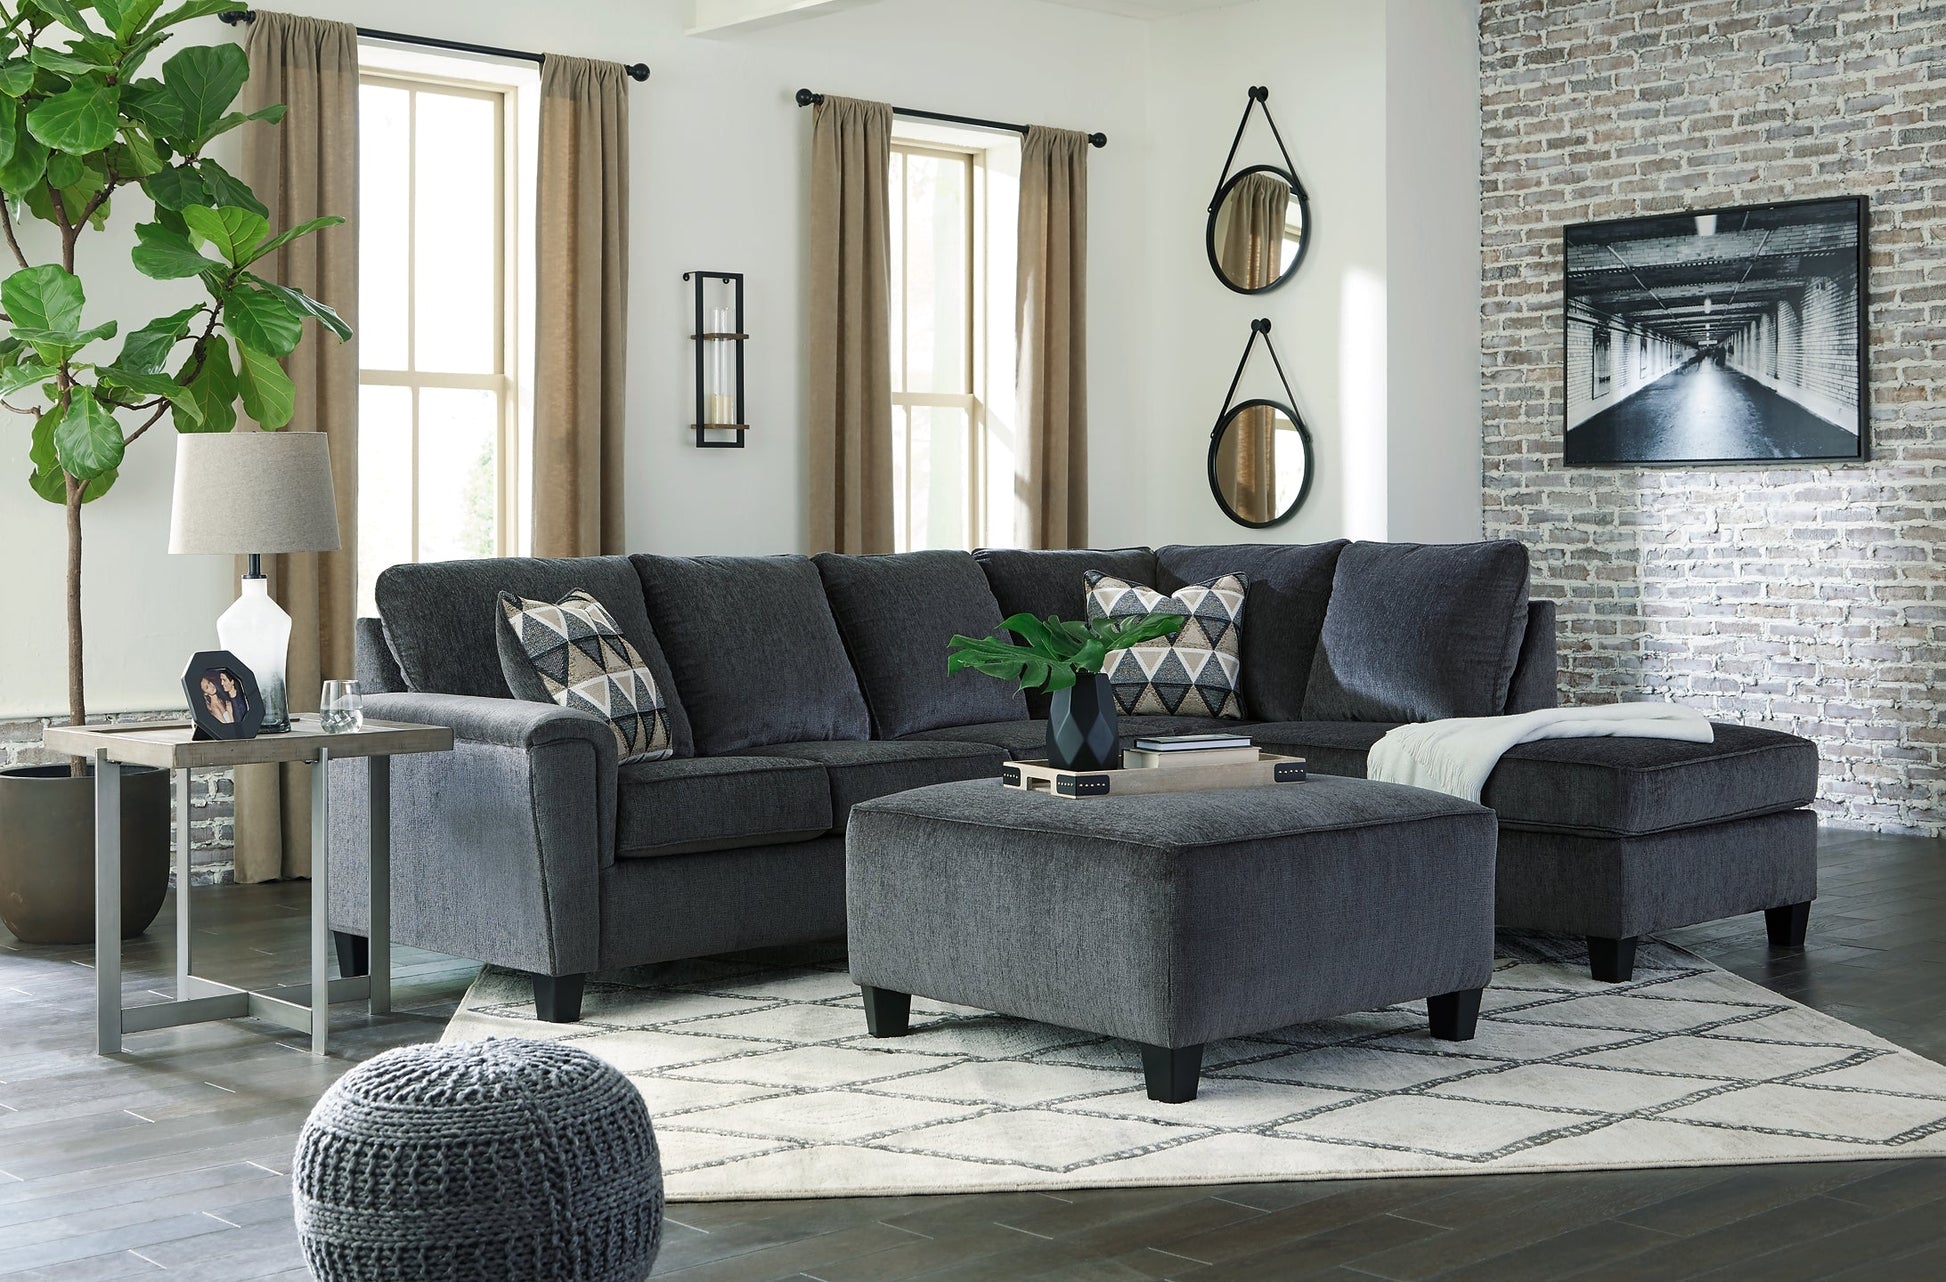 Abinger 2-Piece Sectional with Ottoman Cloud 9 Sleep Shops